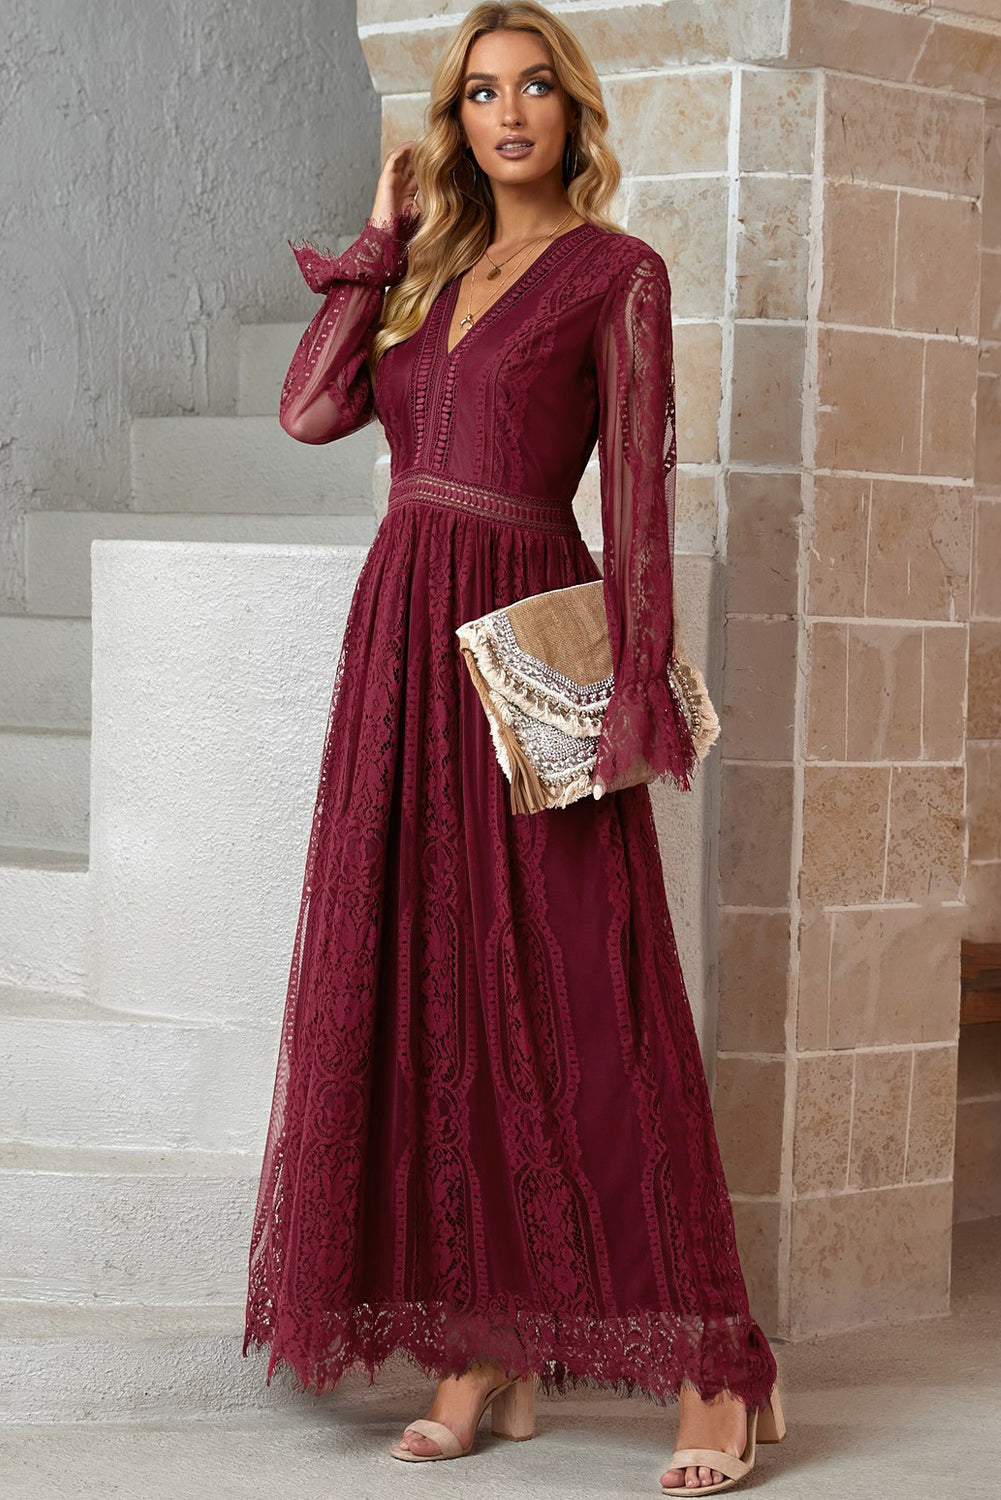 Dreams 70's Boho Lace Maxi Dress in Wine or Wedding White